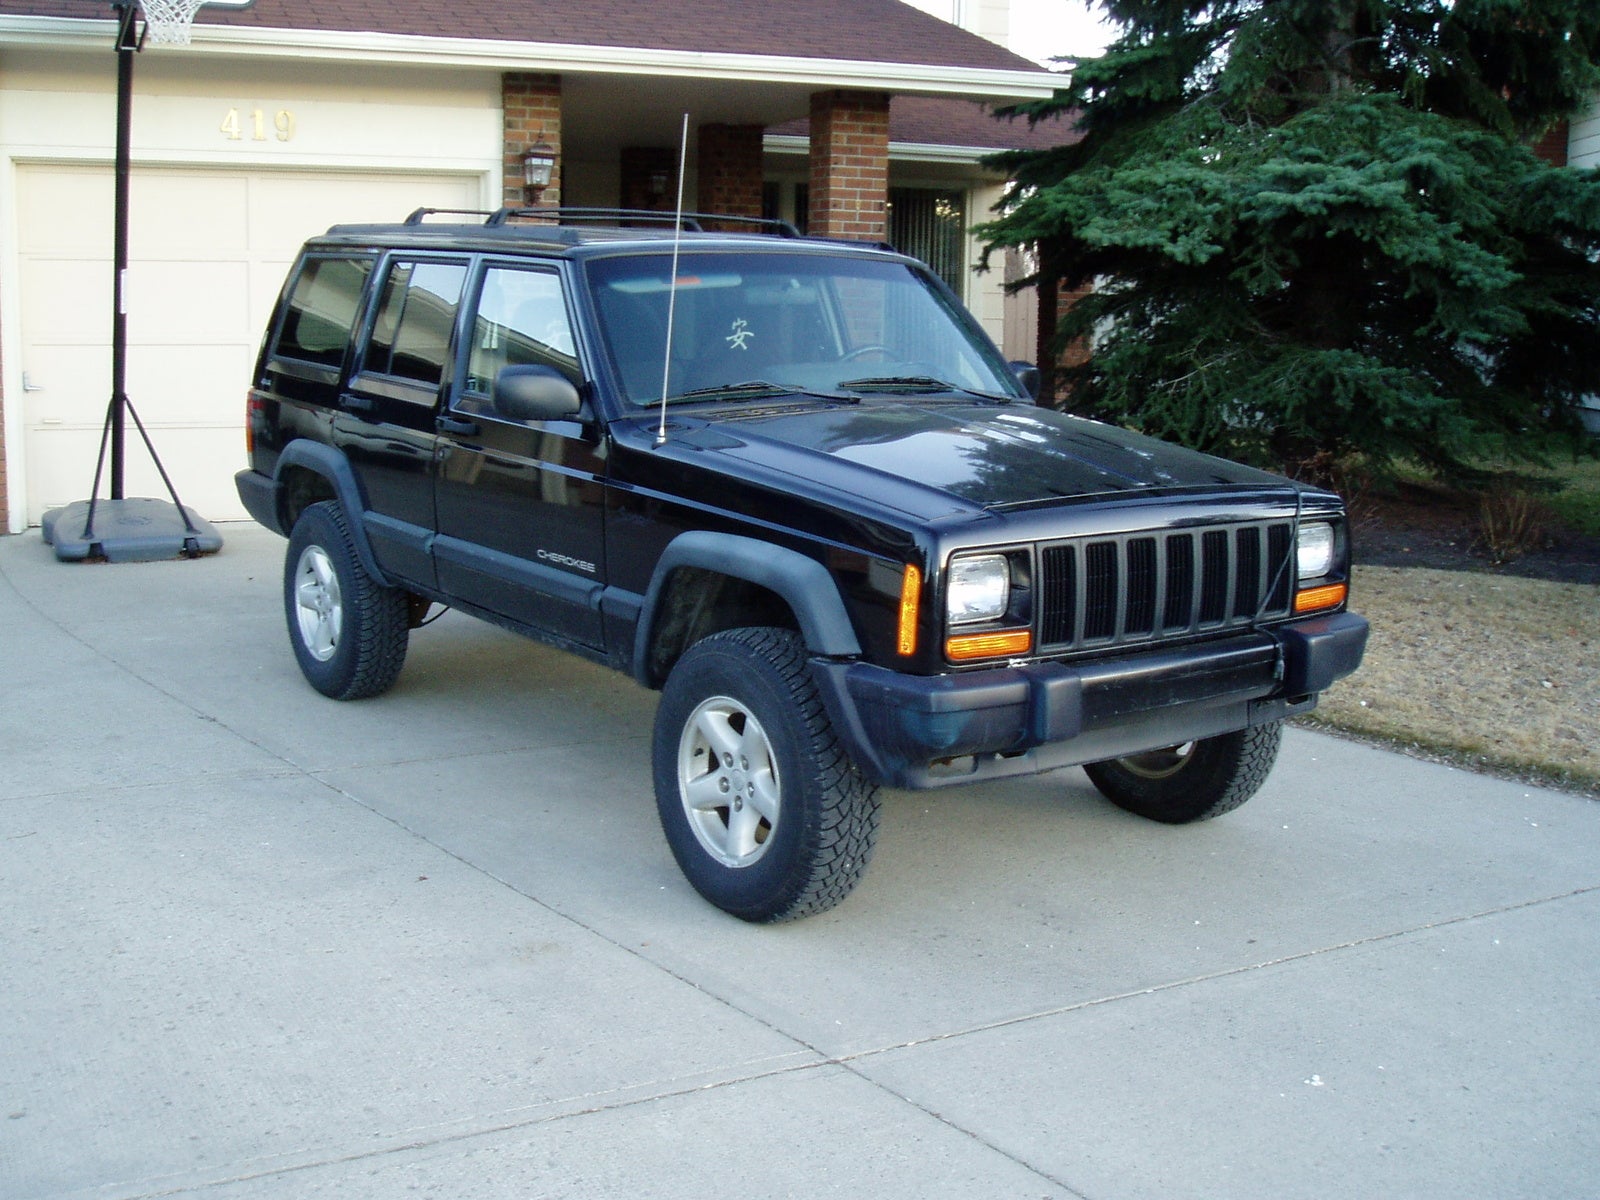 Is a 1998 jeep cherokee a good deal